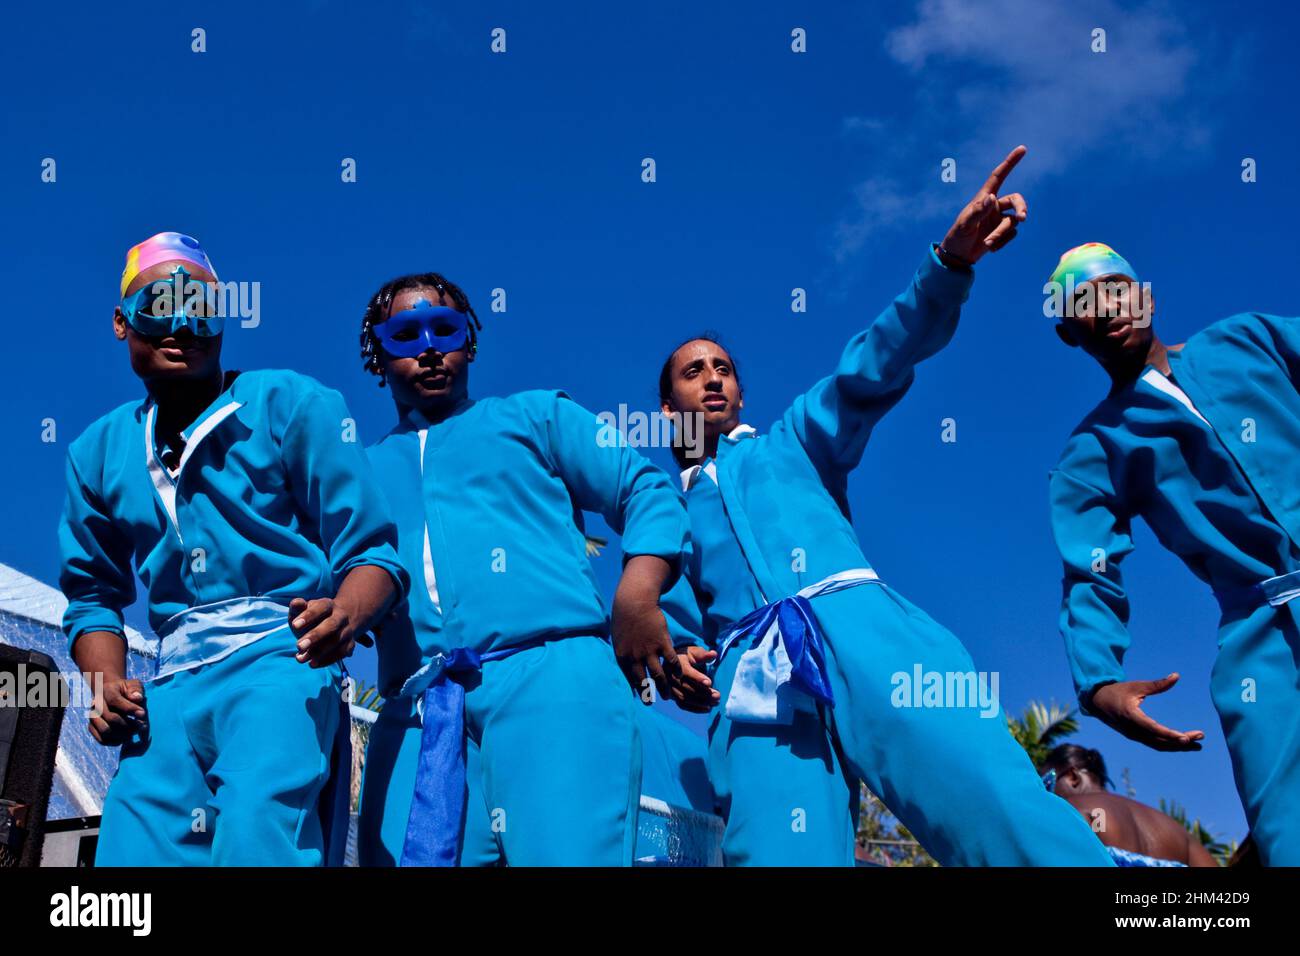 Four young men in matching blue suits celebrate carnival in the Seychelles. Stock Photo